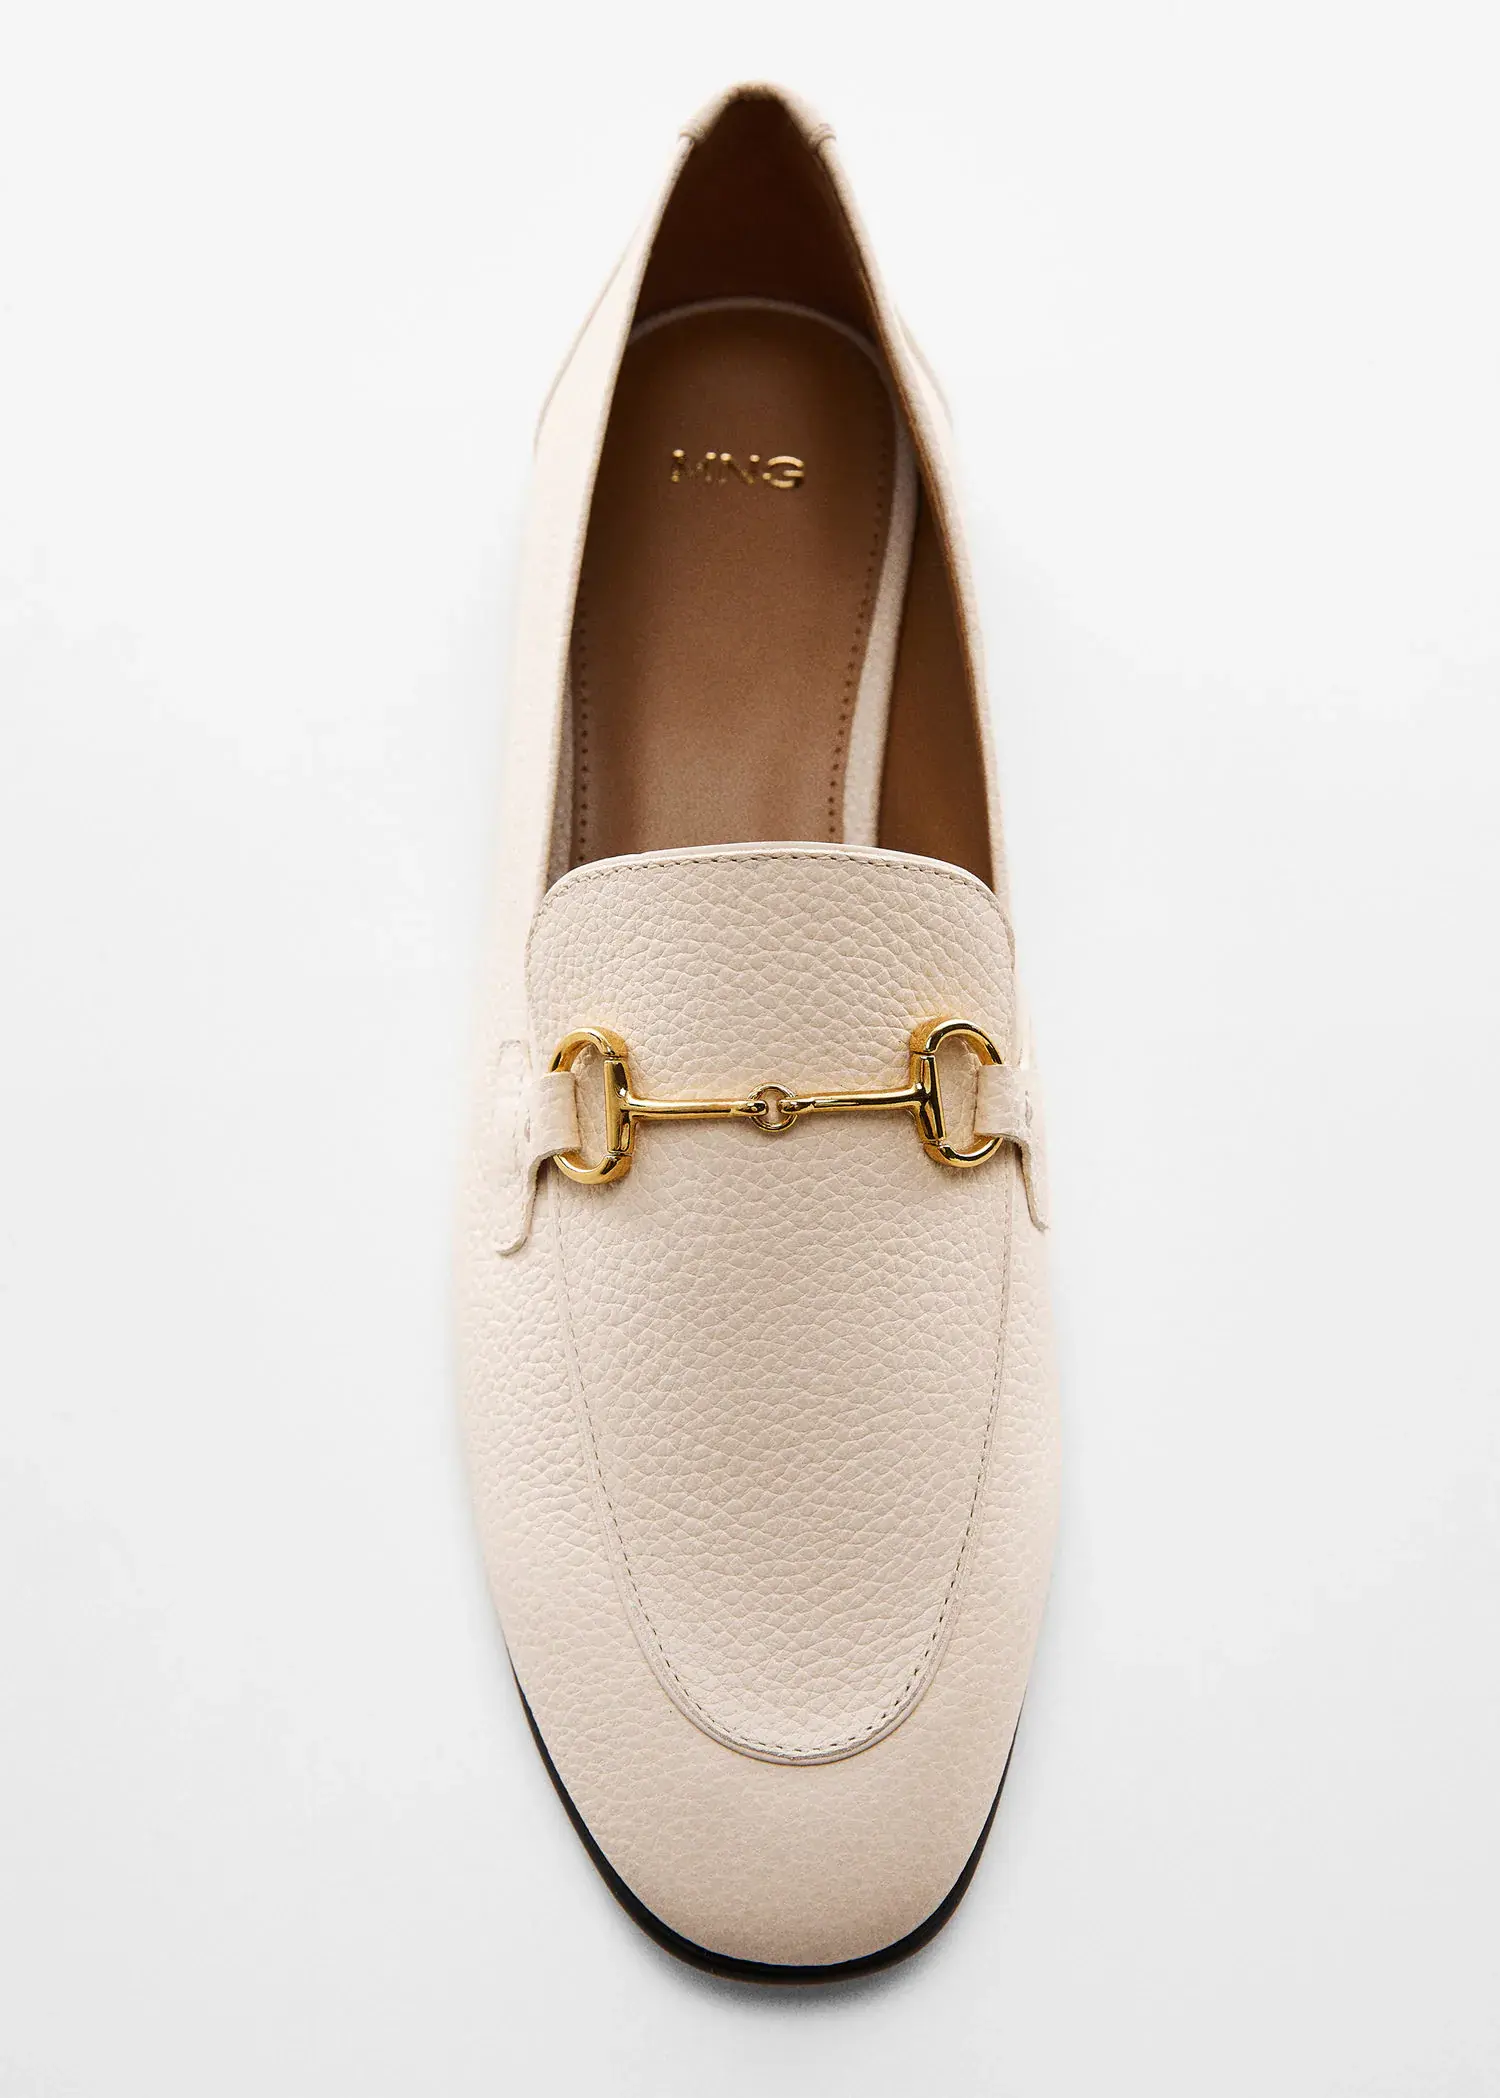 Mango Leather moccasins with metallic detail. 3